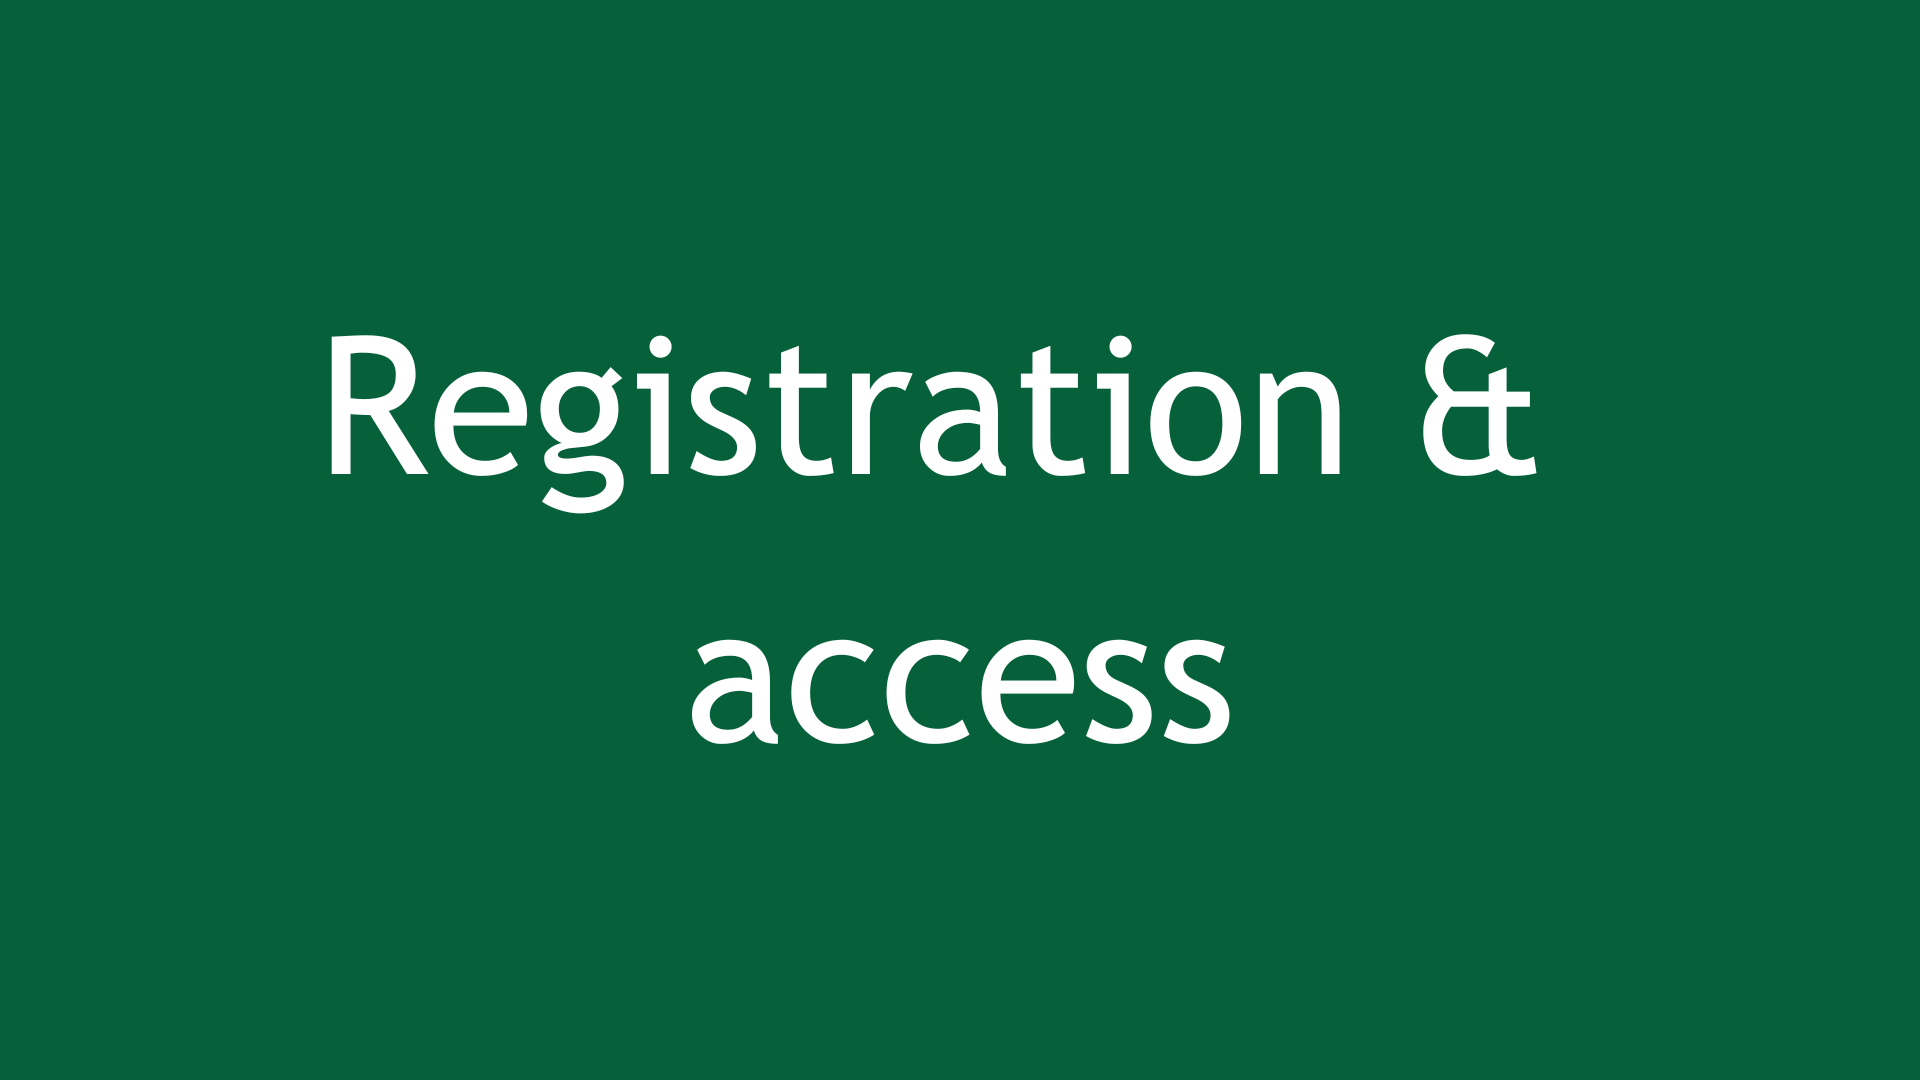 Registration and access